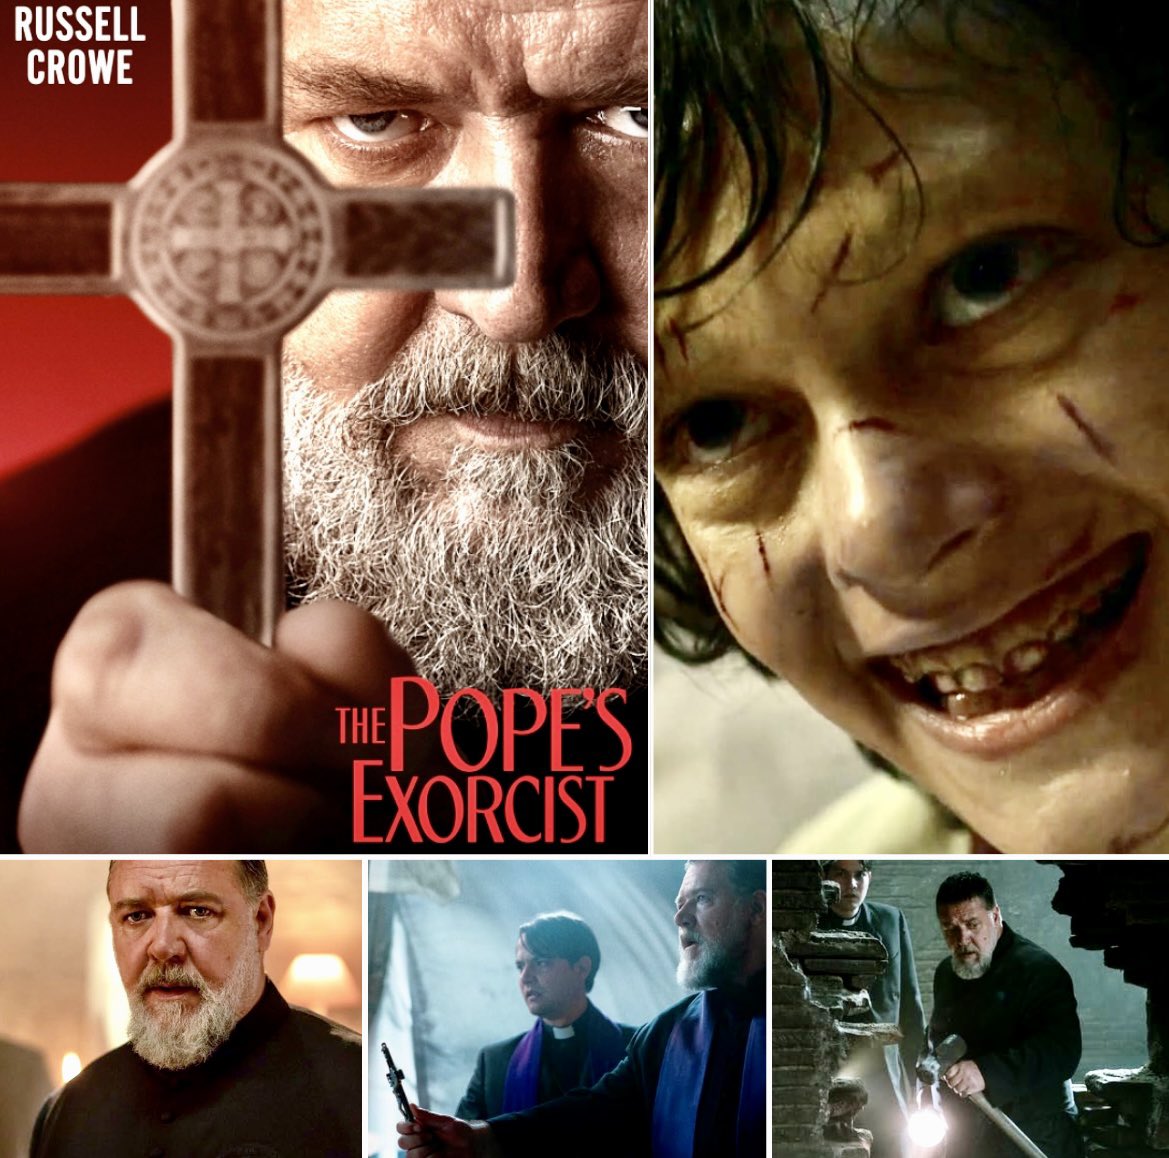 I didn't hate it. #ThePopesExorcist